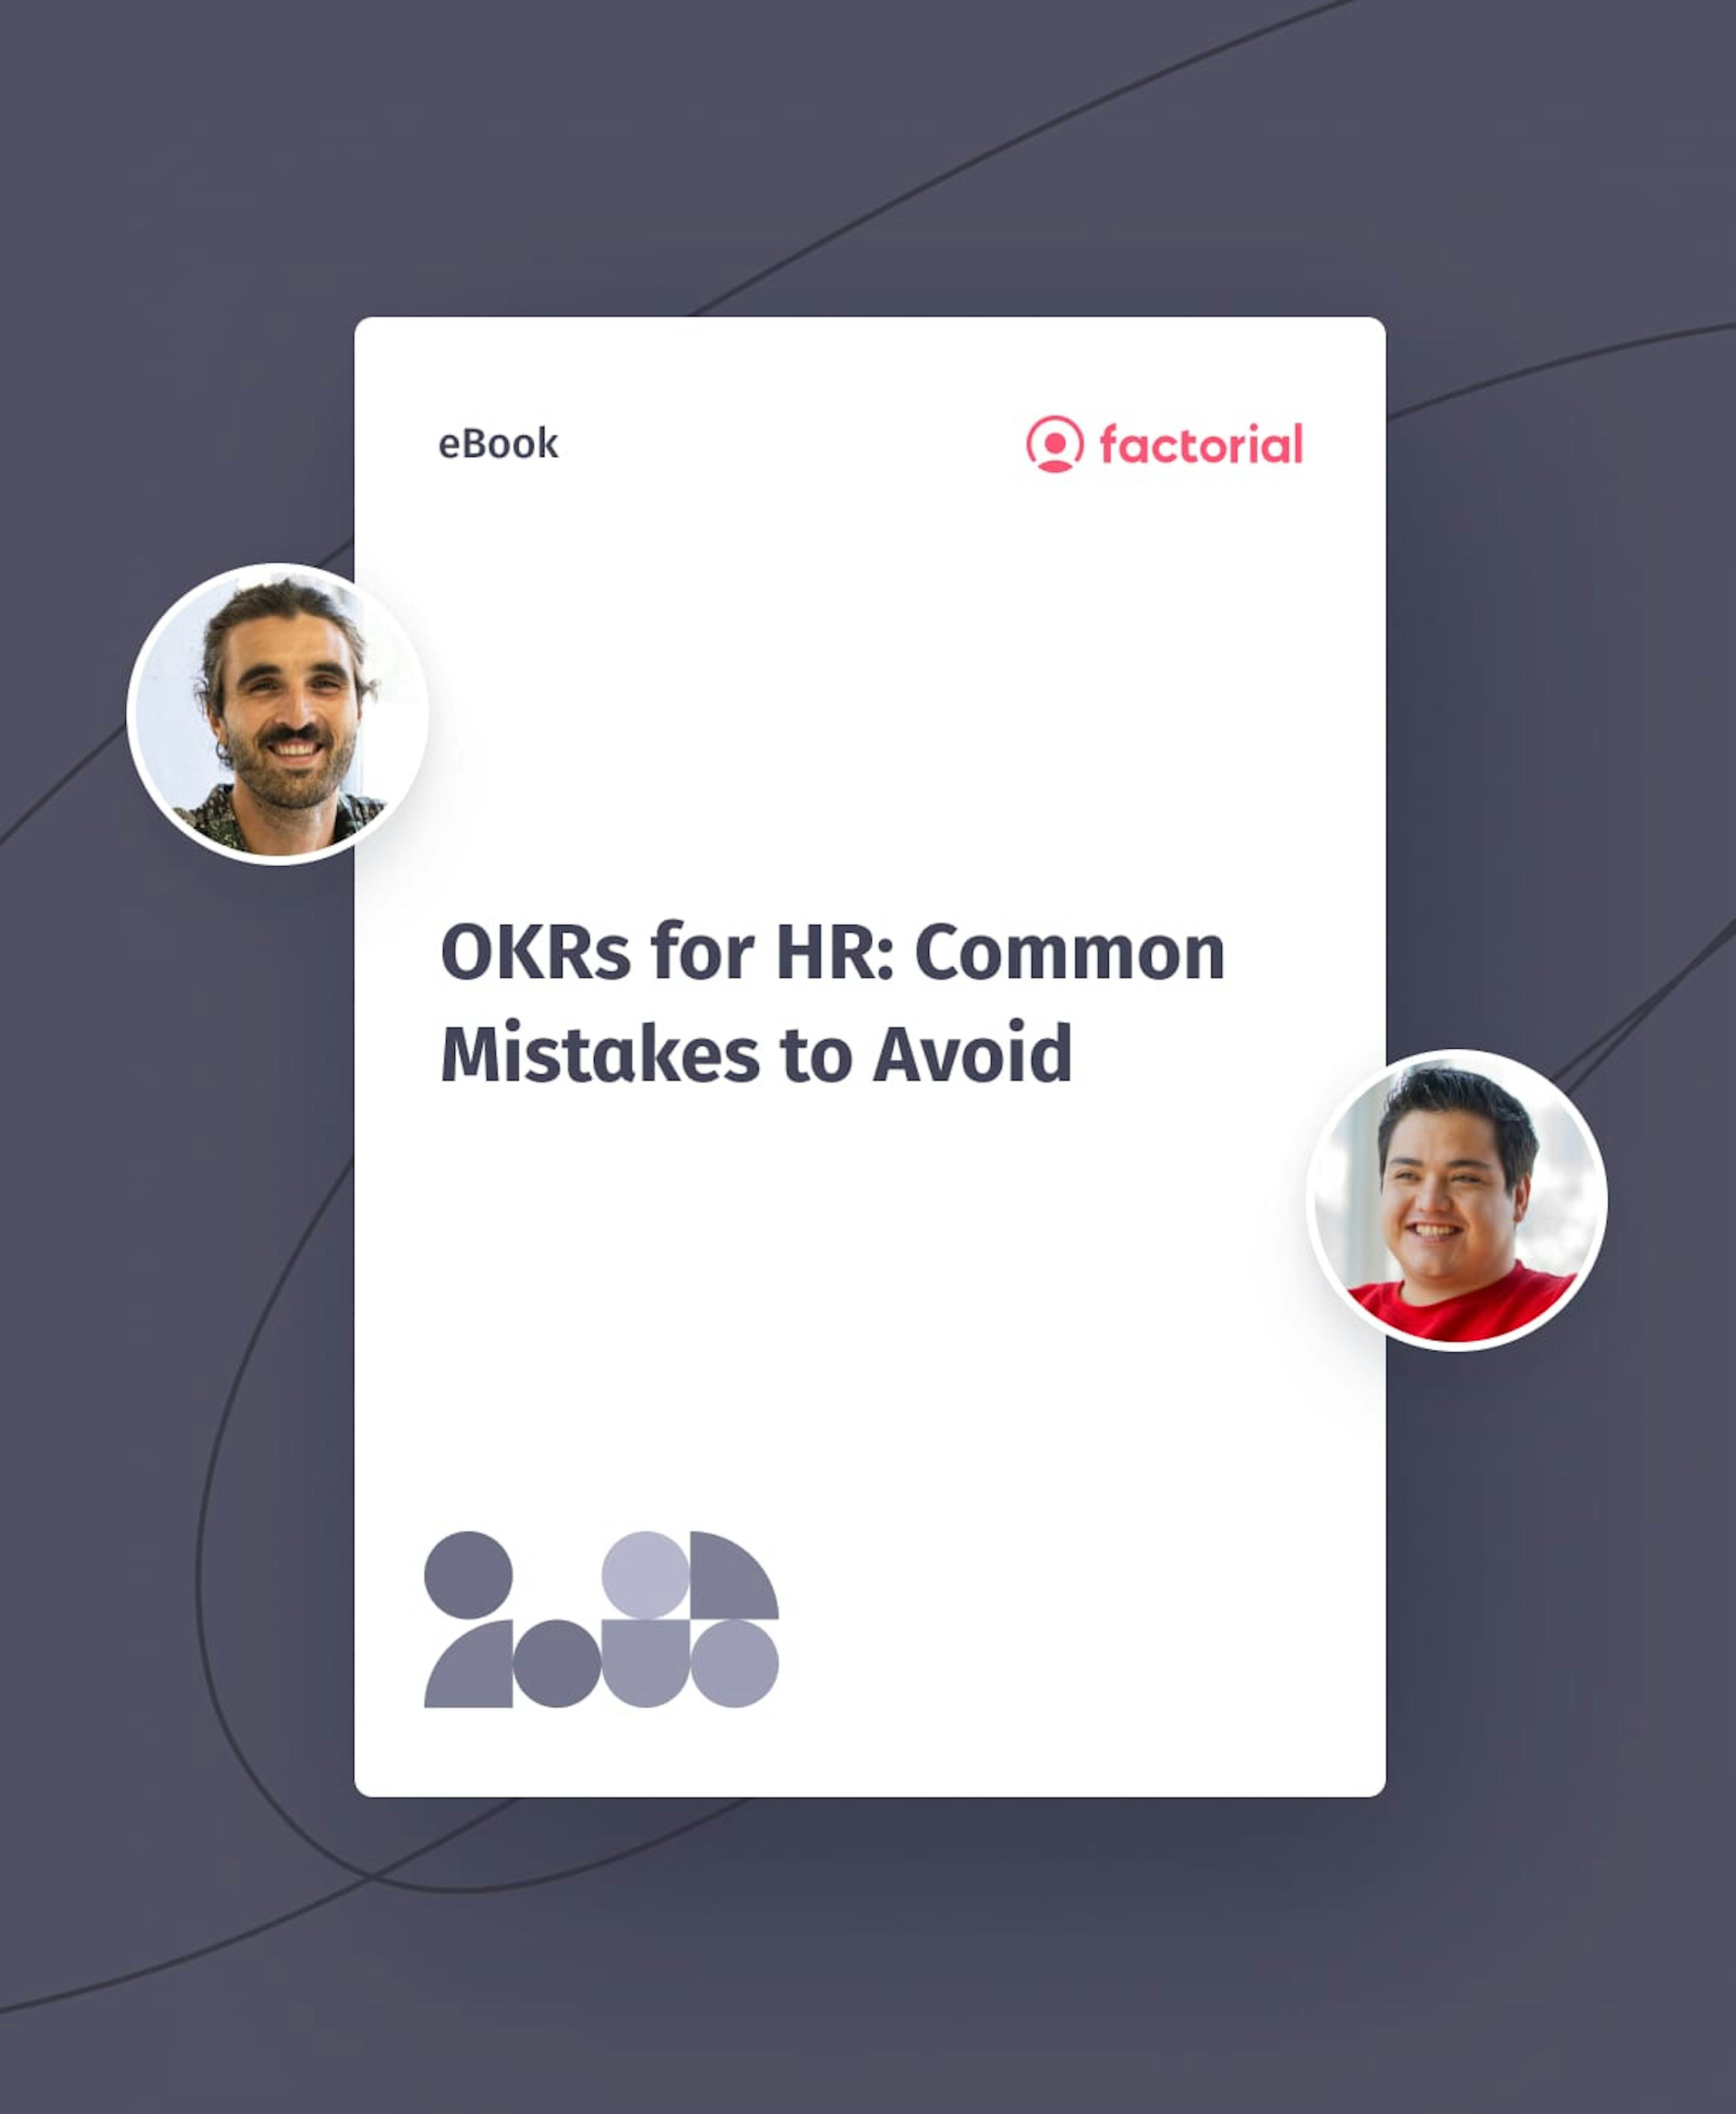 OKRs for HR: Common Mistakes to Avoid